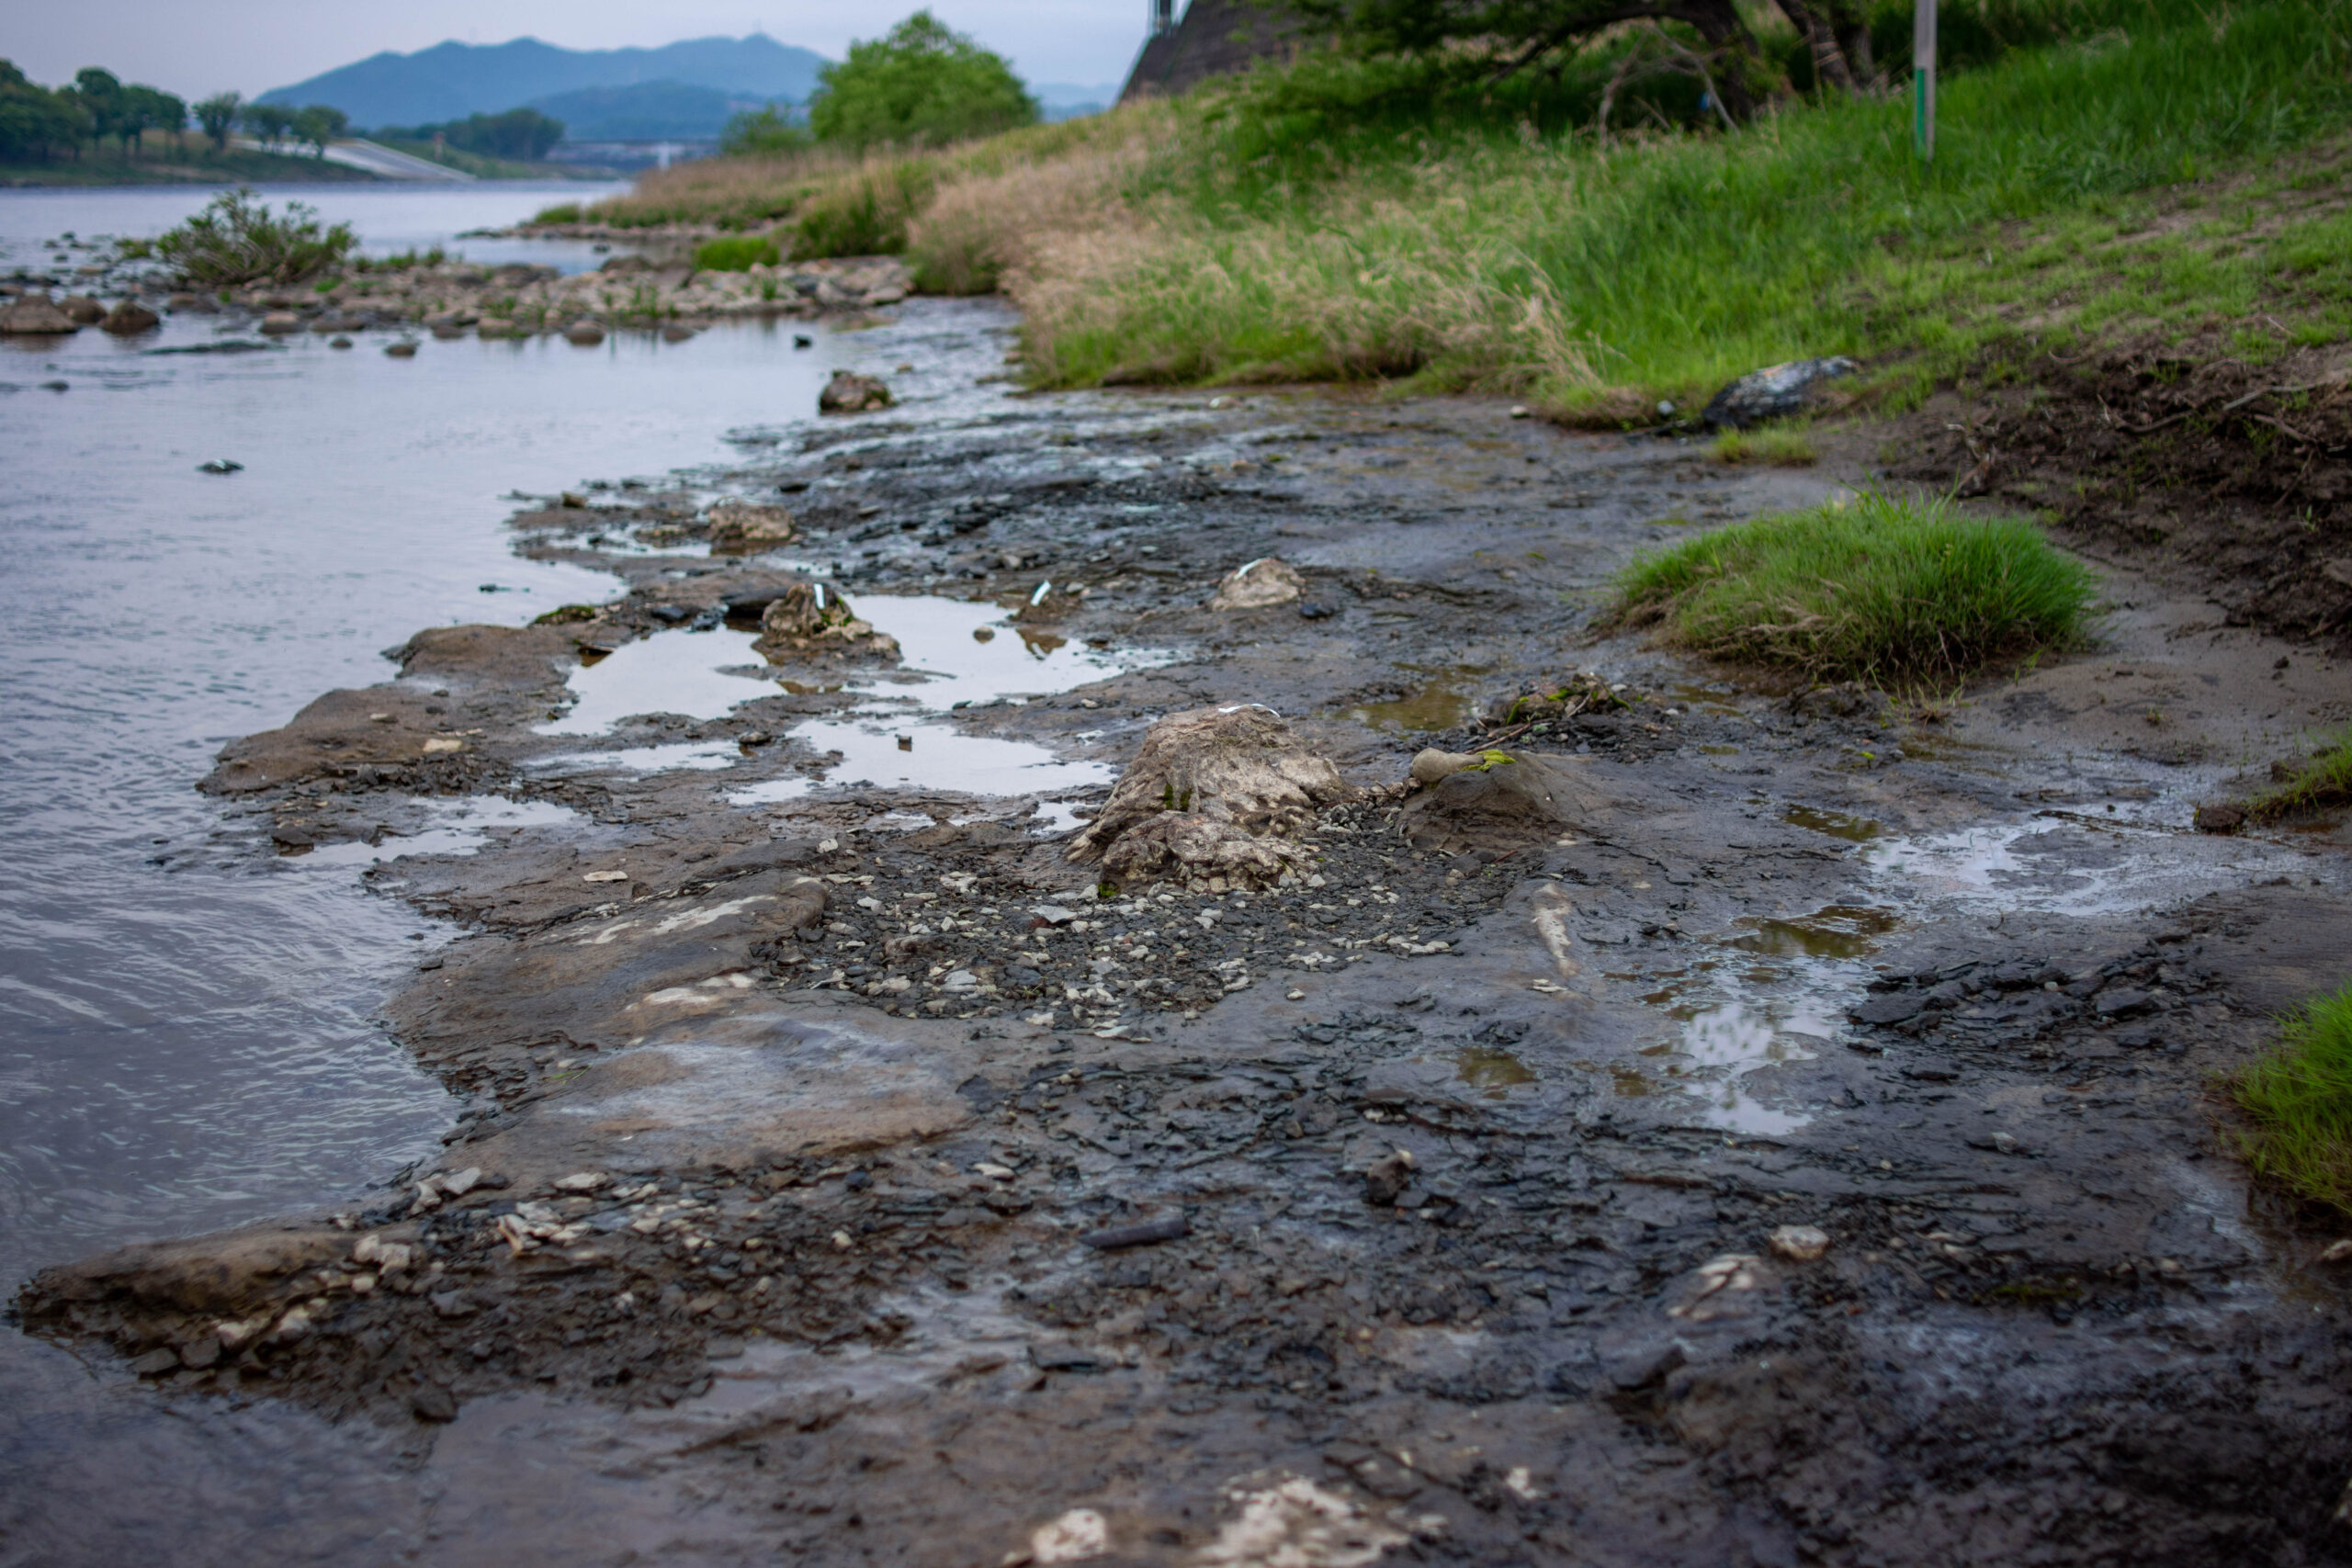 Exposed riverbed from where the fossils were found. (Photo: Toshihiro Yamada)